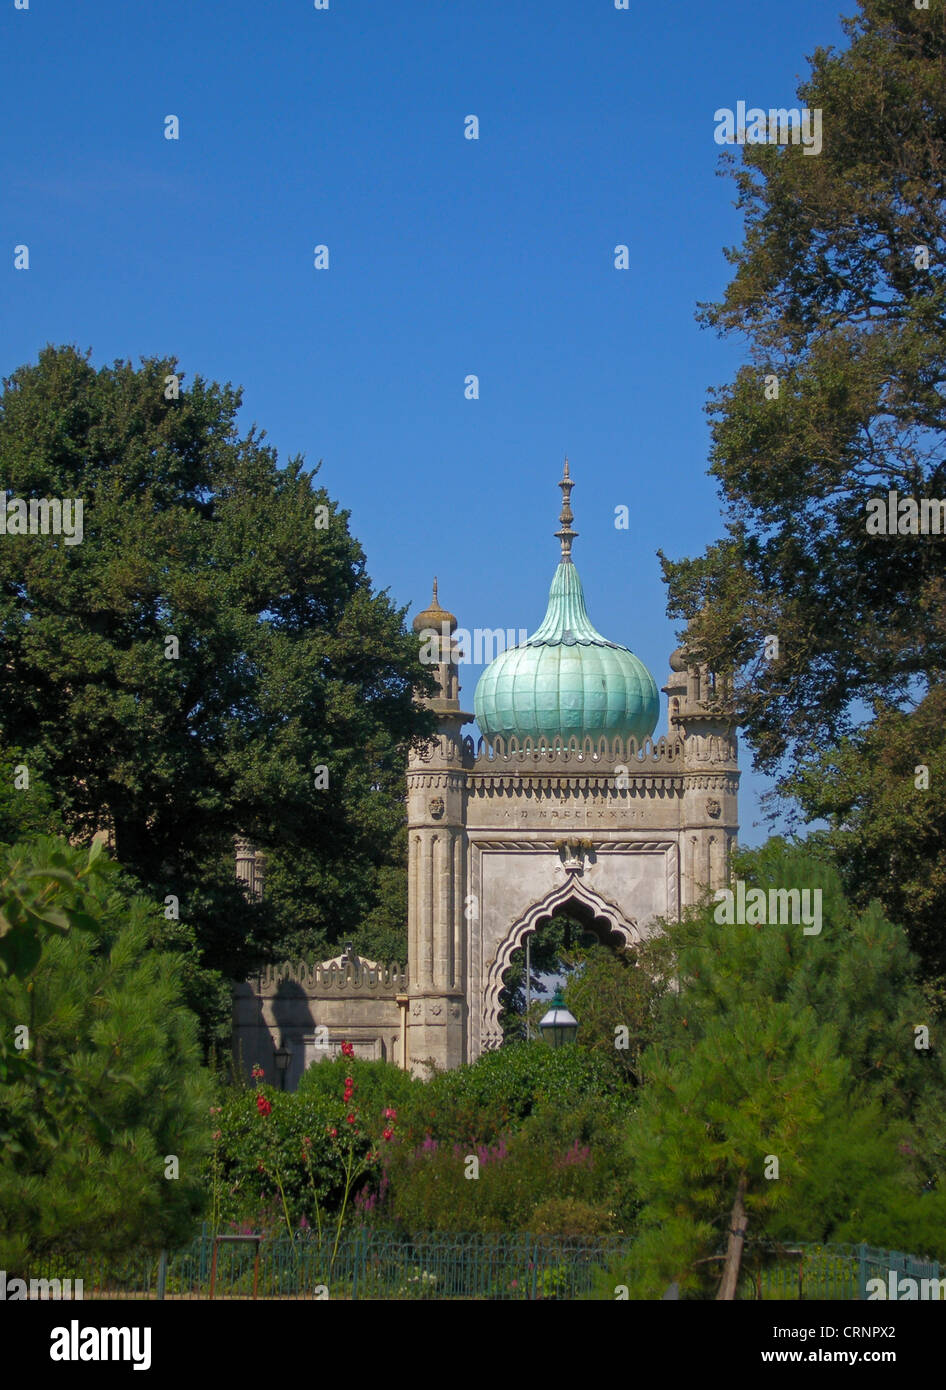 The North Gate of the Royal Pavilion, a former royal residence located in Brighton. Often referred to as the Brighton Pavilion, Stock Photo